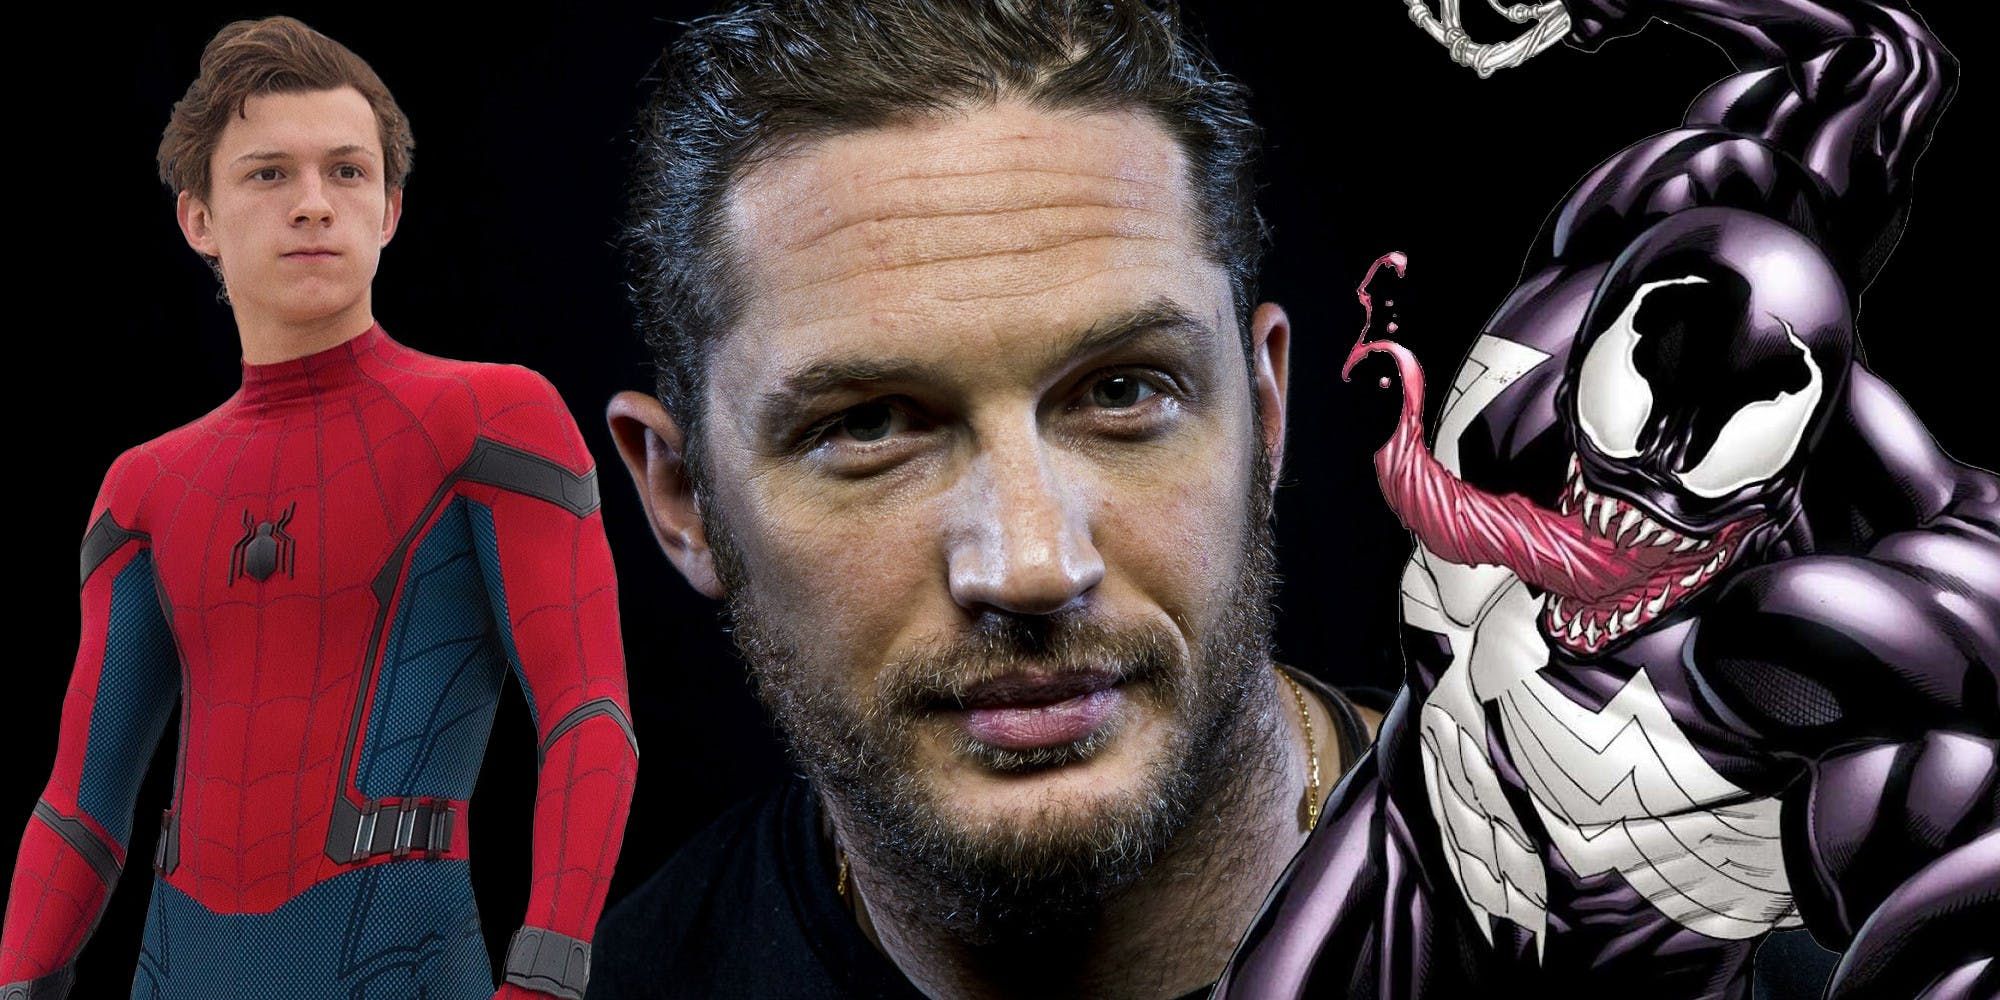 Spider-Man, Tom Hardy, and Venom shared promotional image